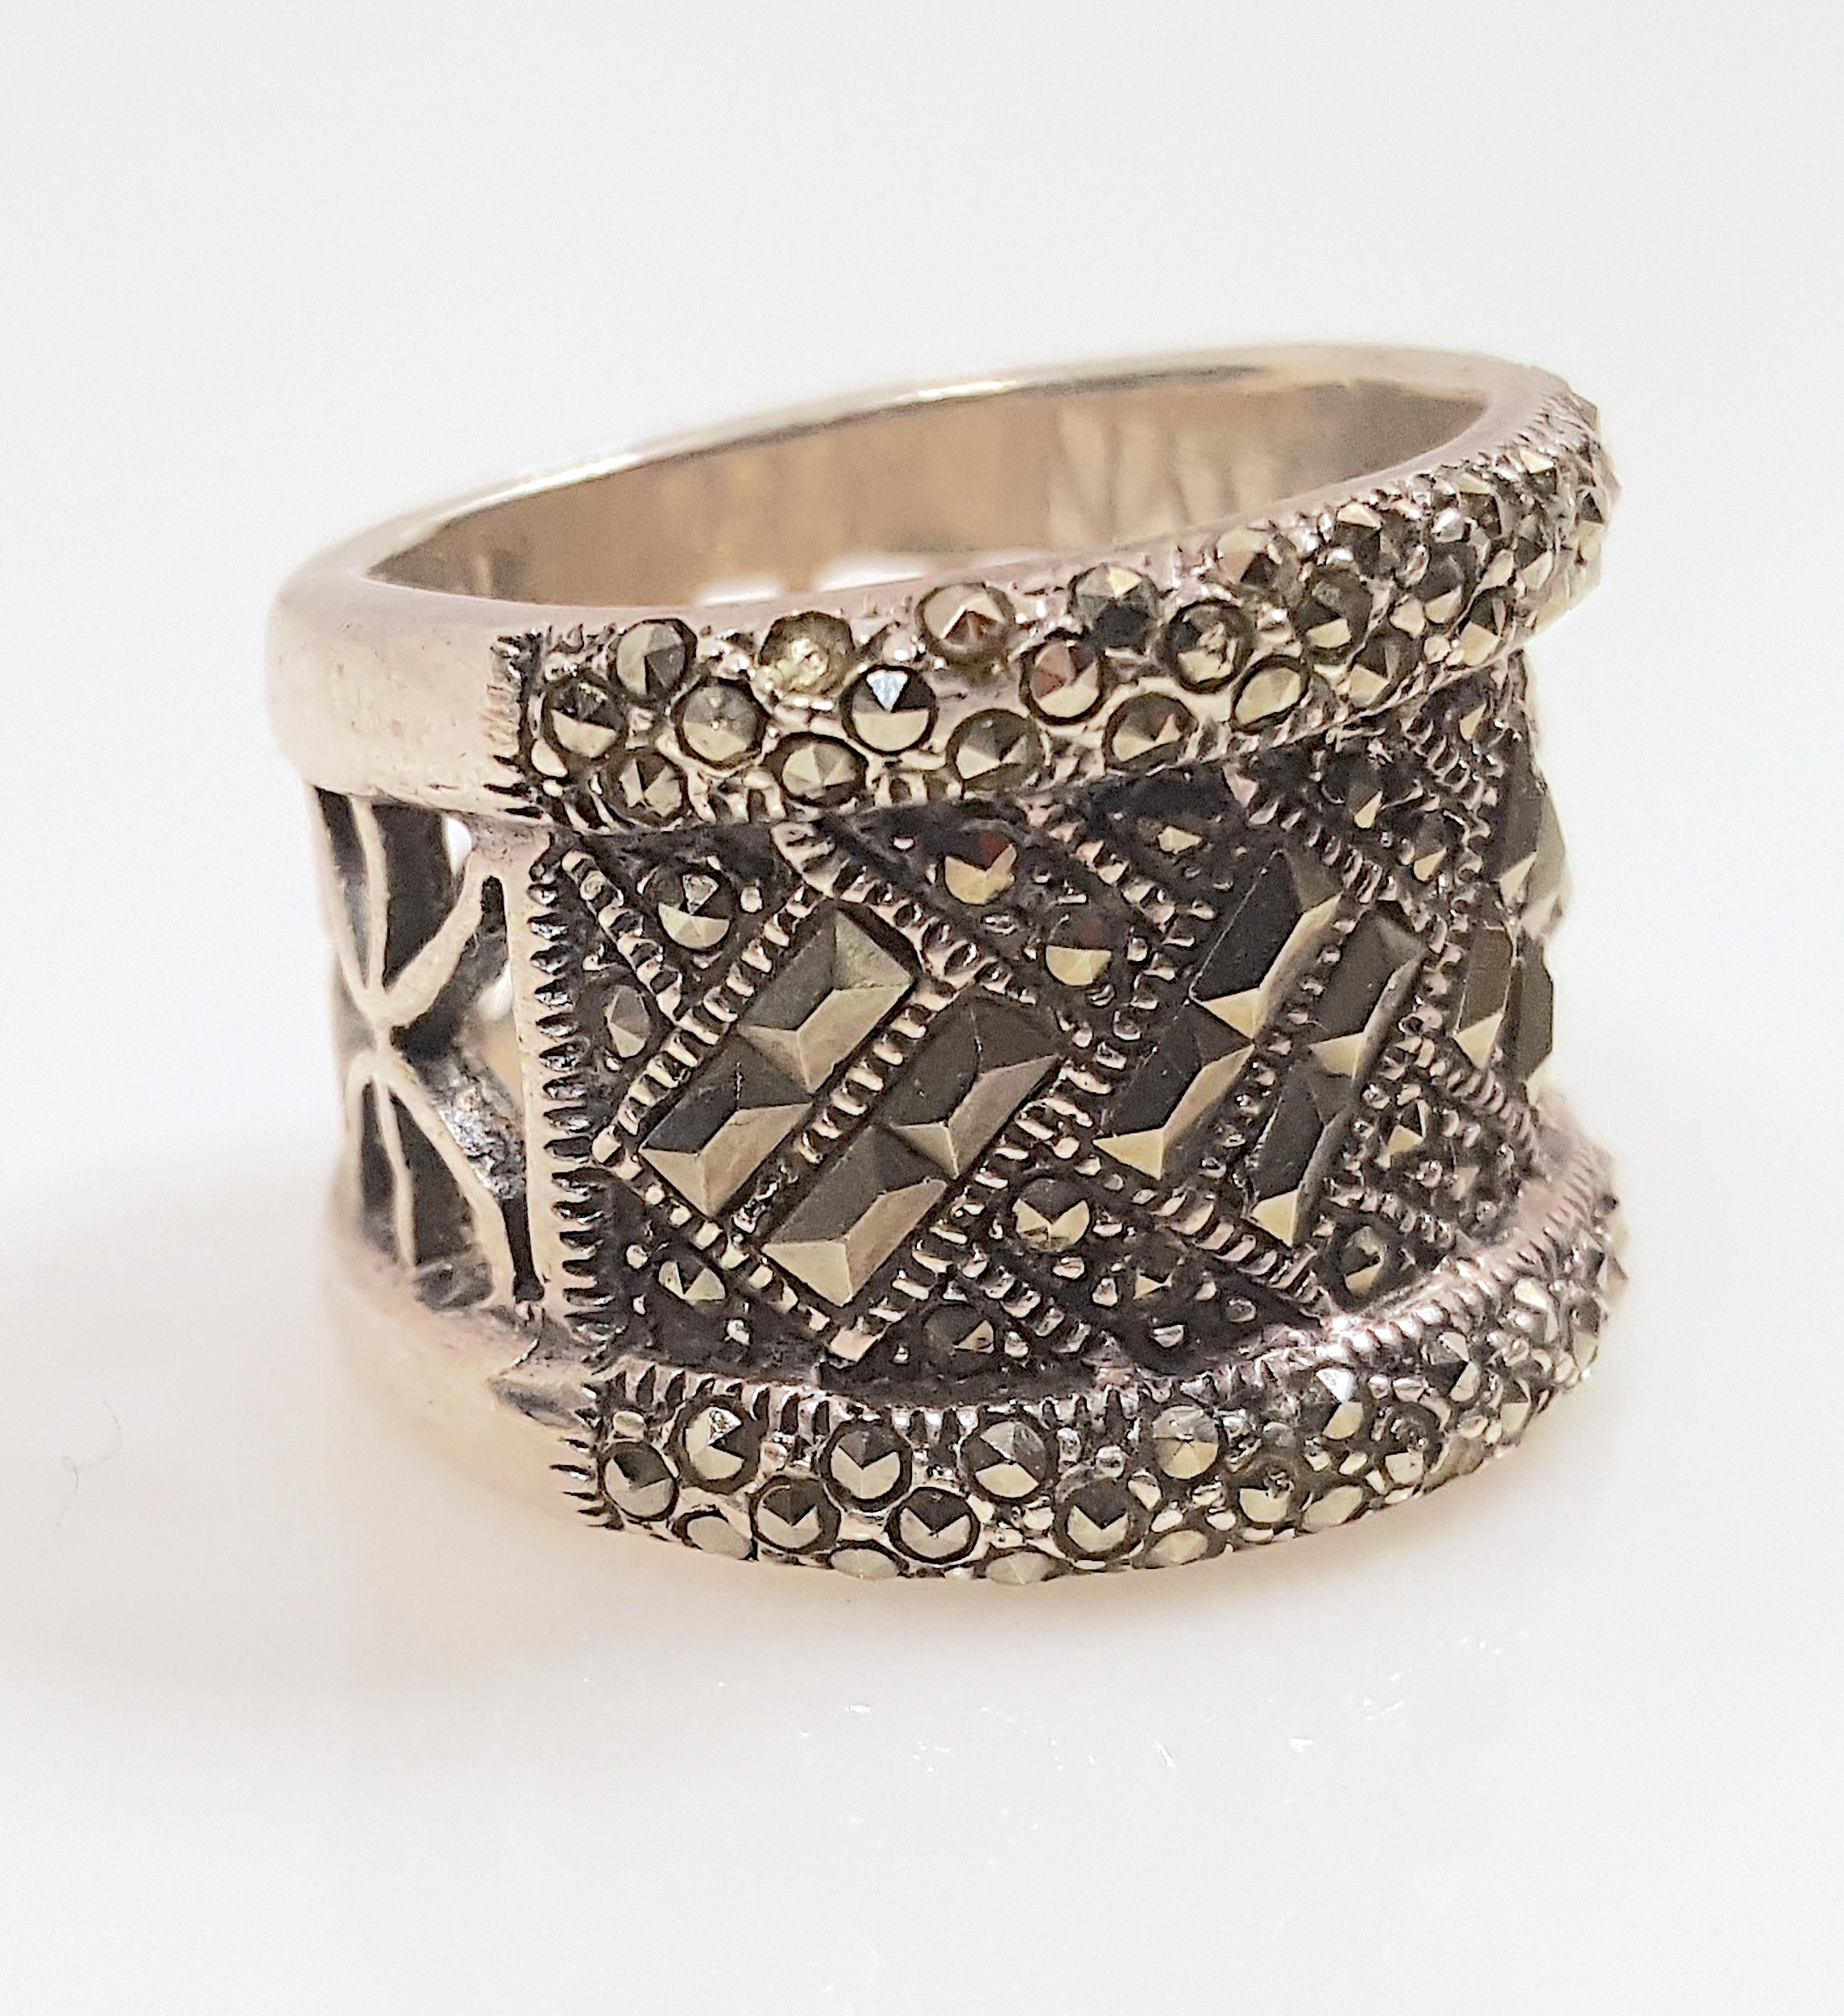 Encrusted with mixed-cut pyrite and marcasite stones for gold and silver reflections, this extremely-sparkly double-rimmed wide thick sterling-silver ring was designed by an artisan in an Art Deco style with openwork that is a modern take on